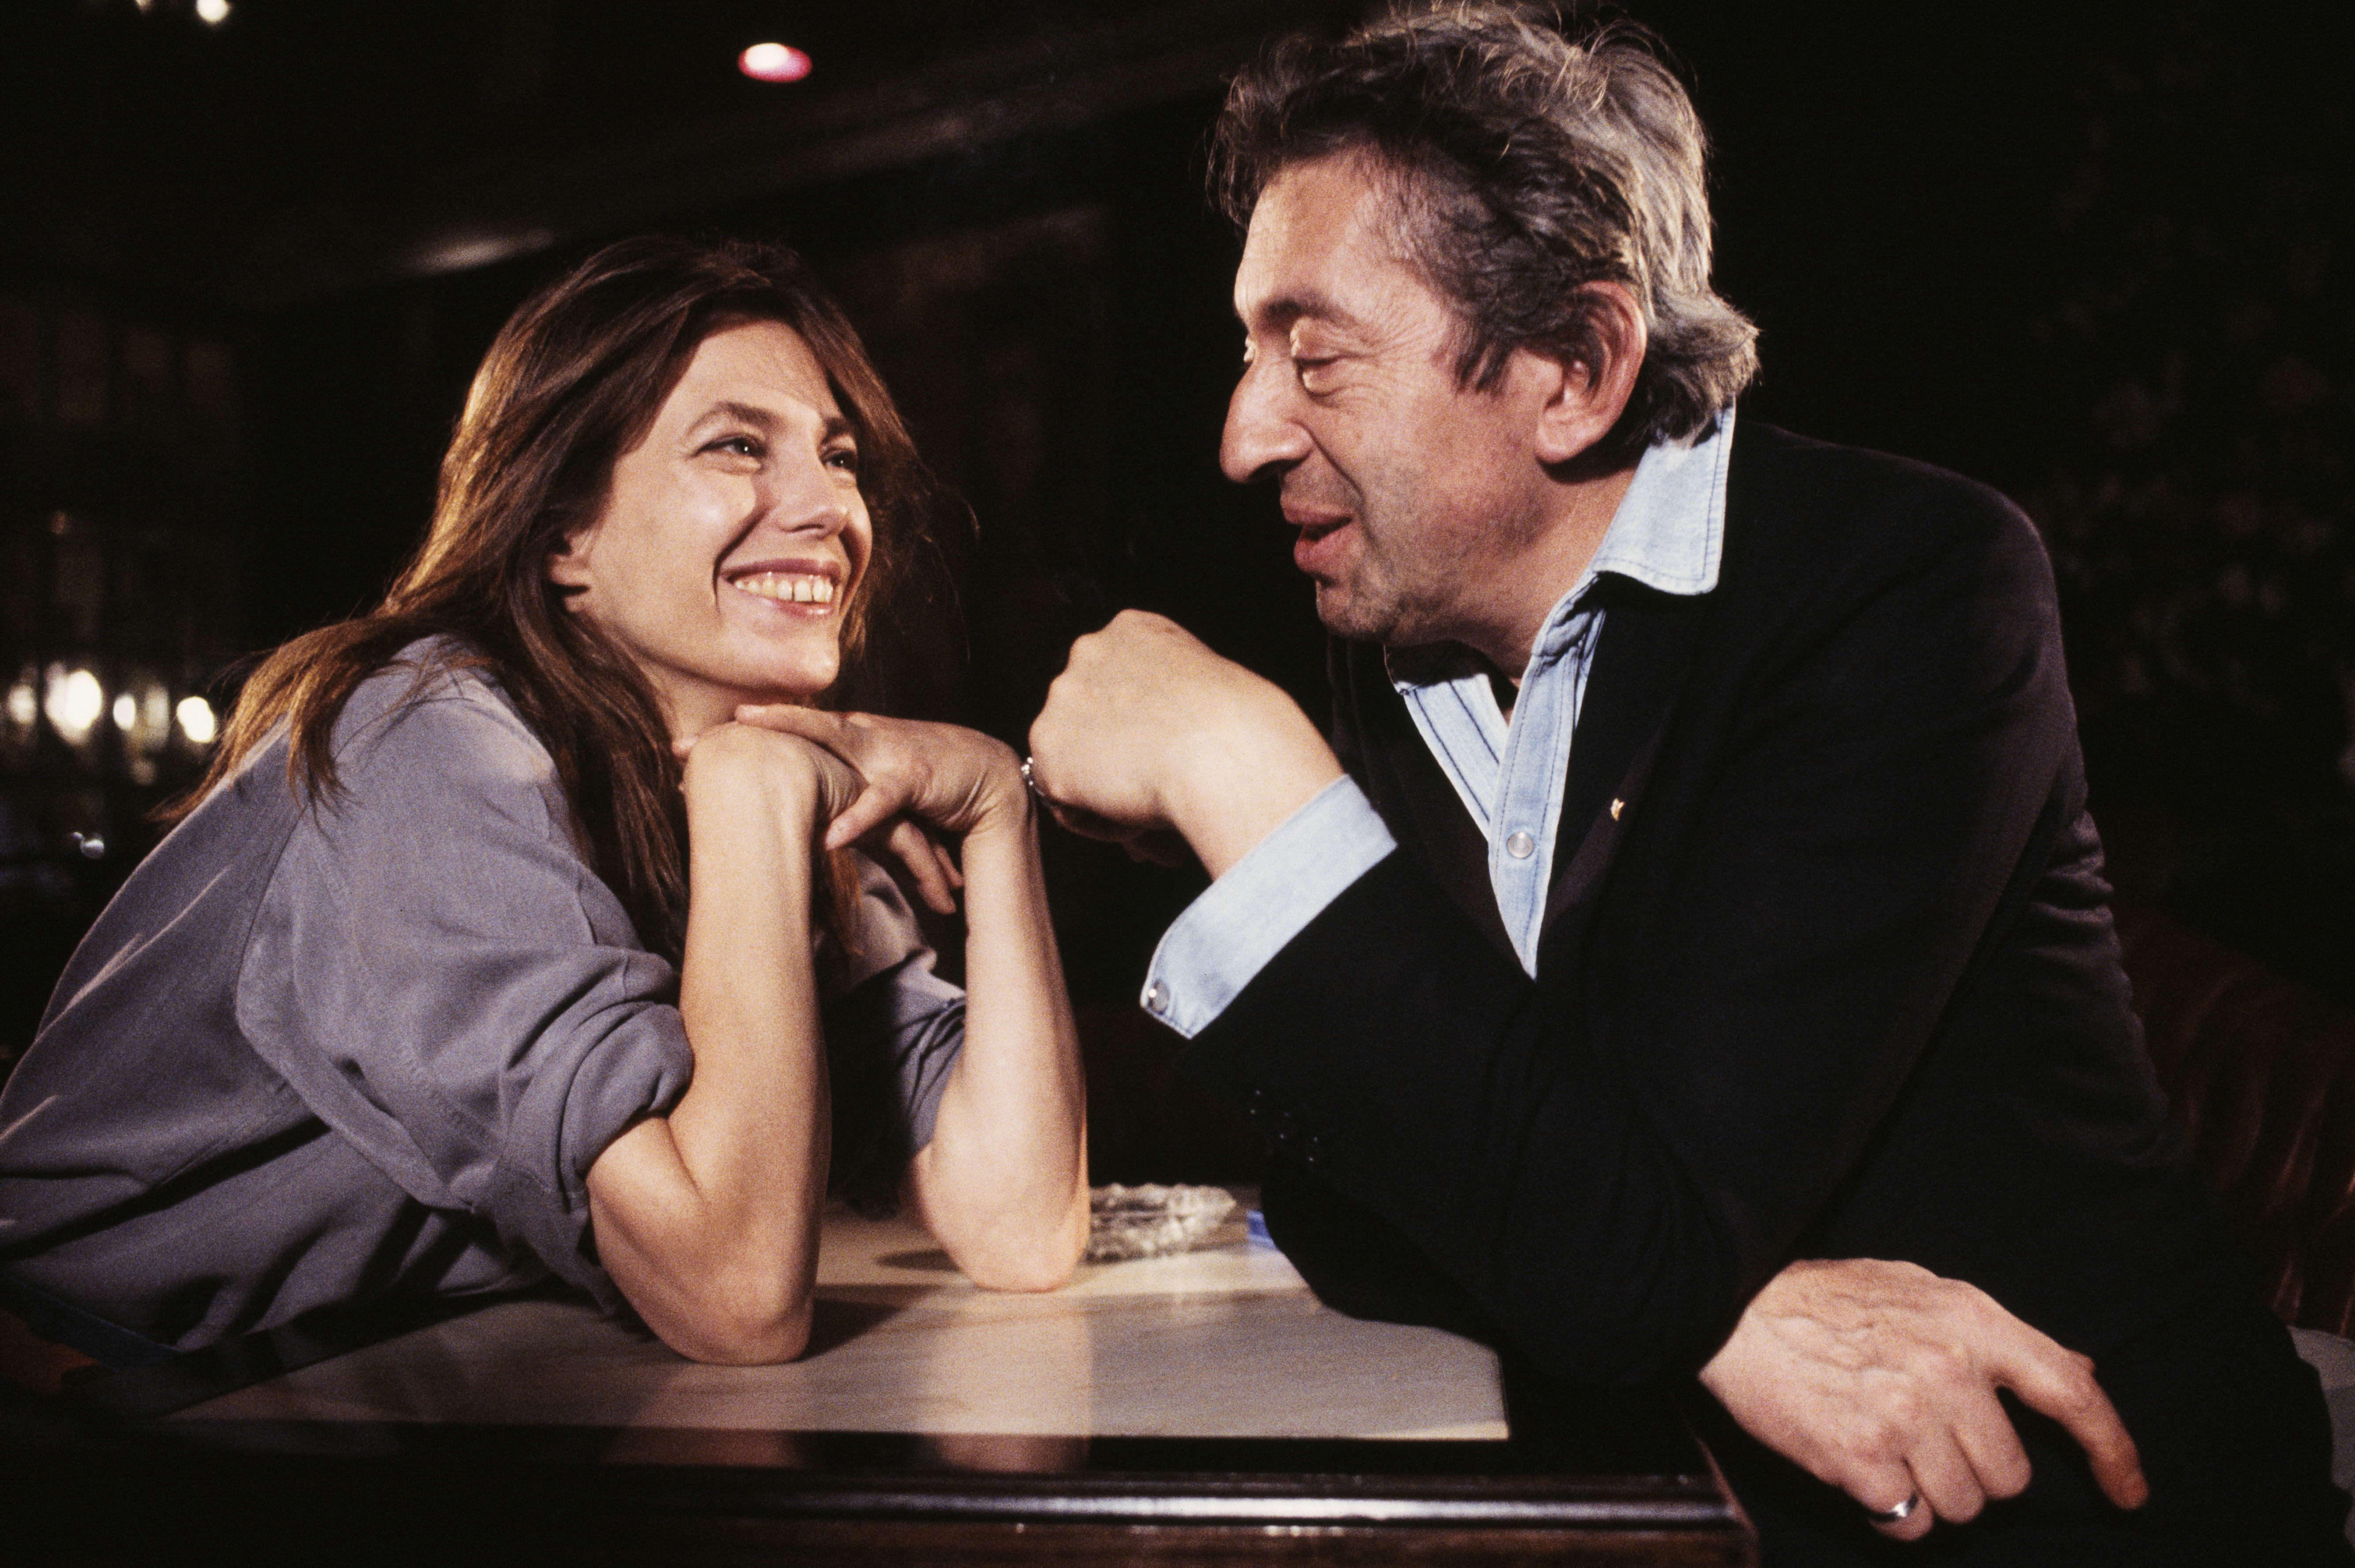 Jane Birkin and Serge Gainsbourg picture taken on January 1, 1985 | Source: Getty Images